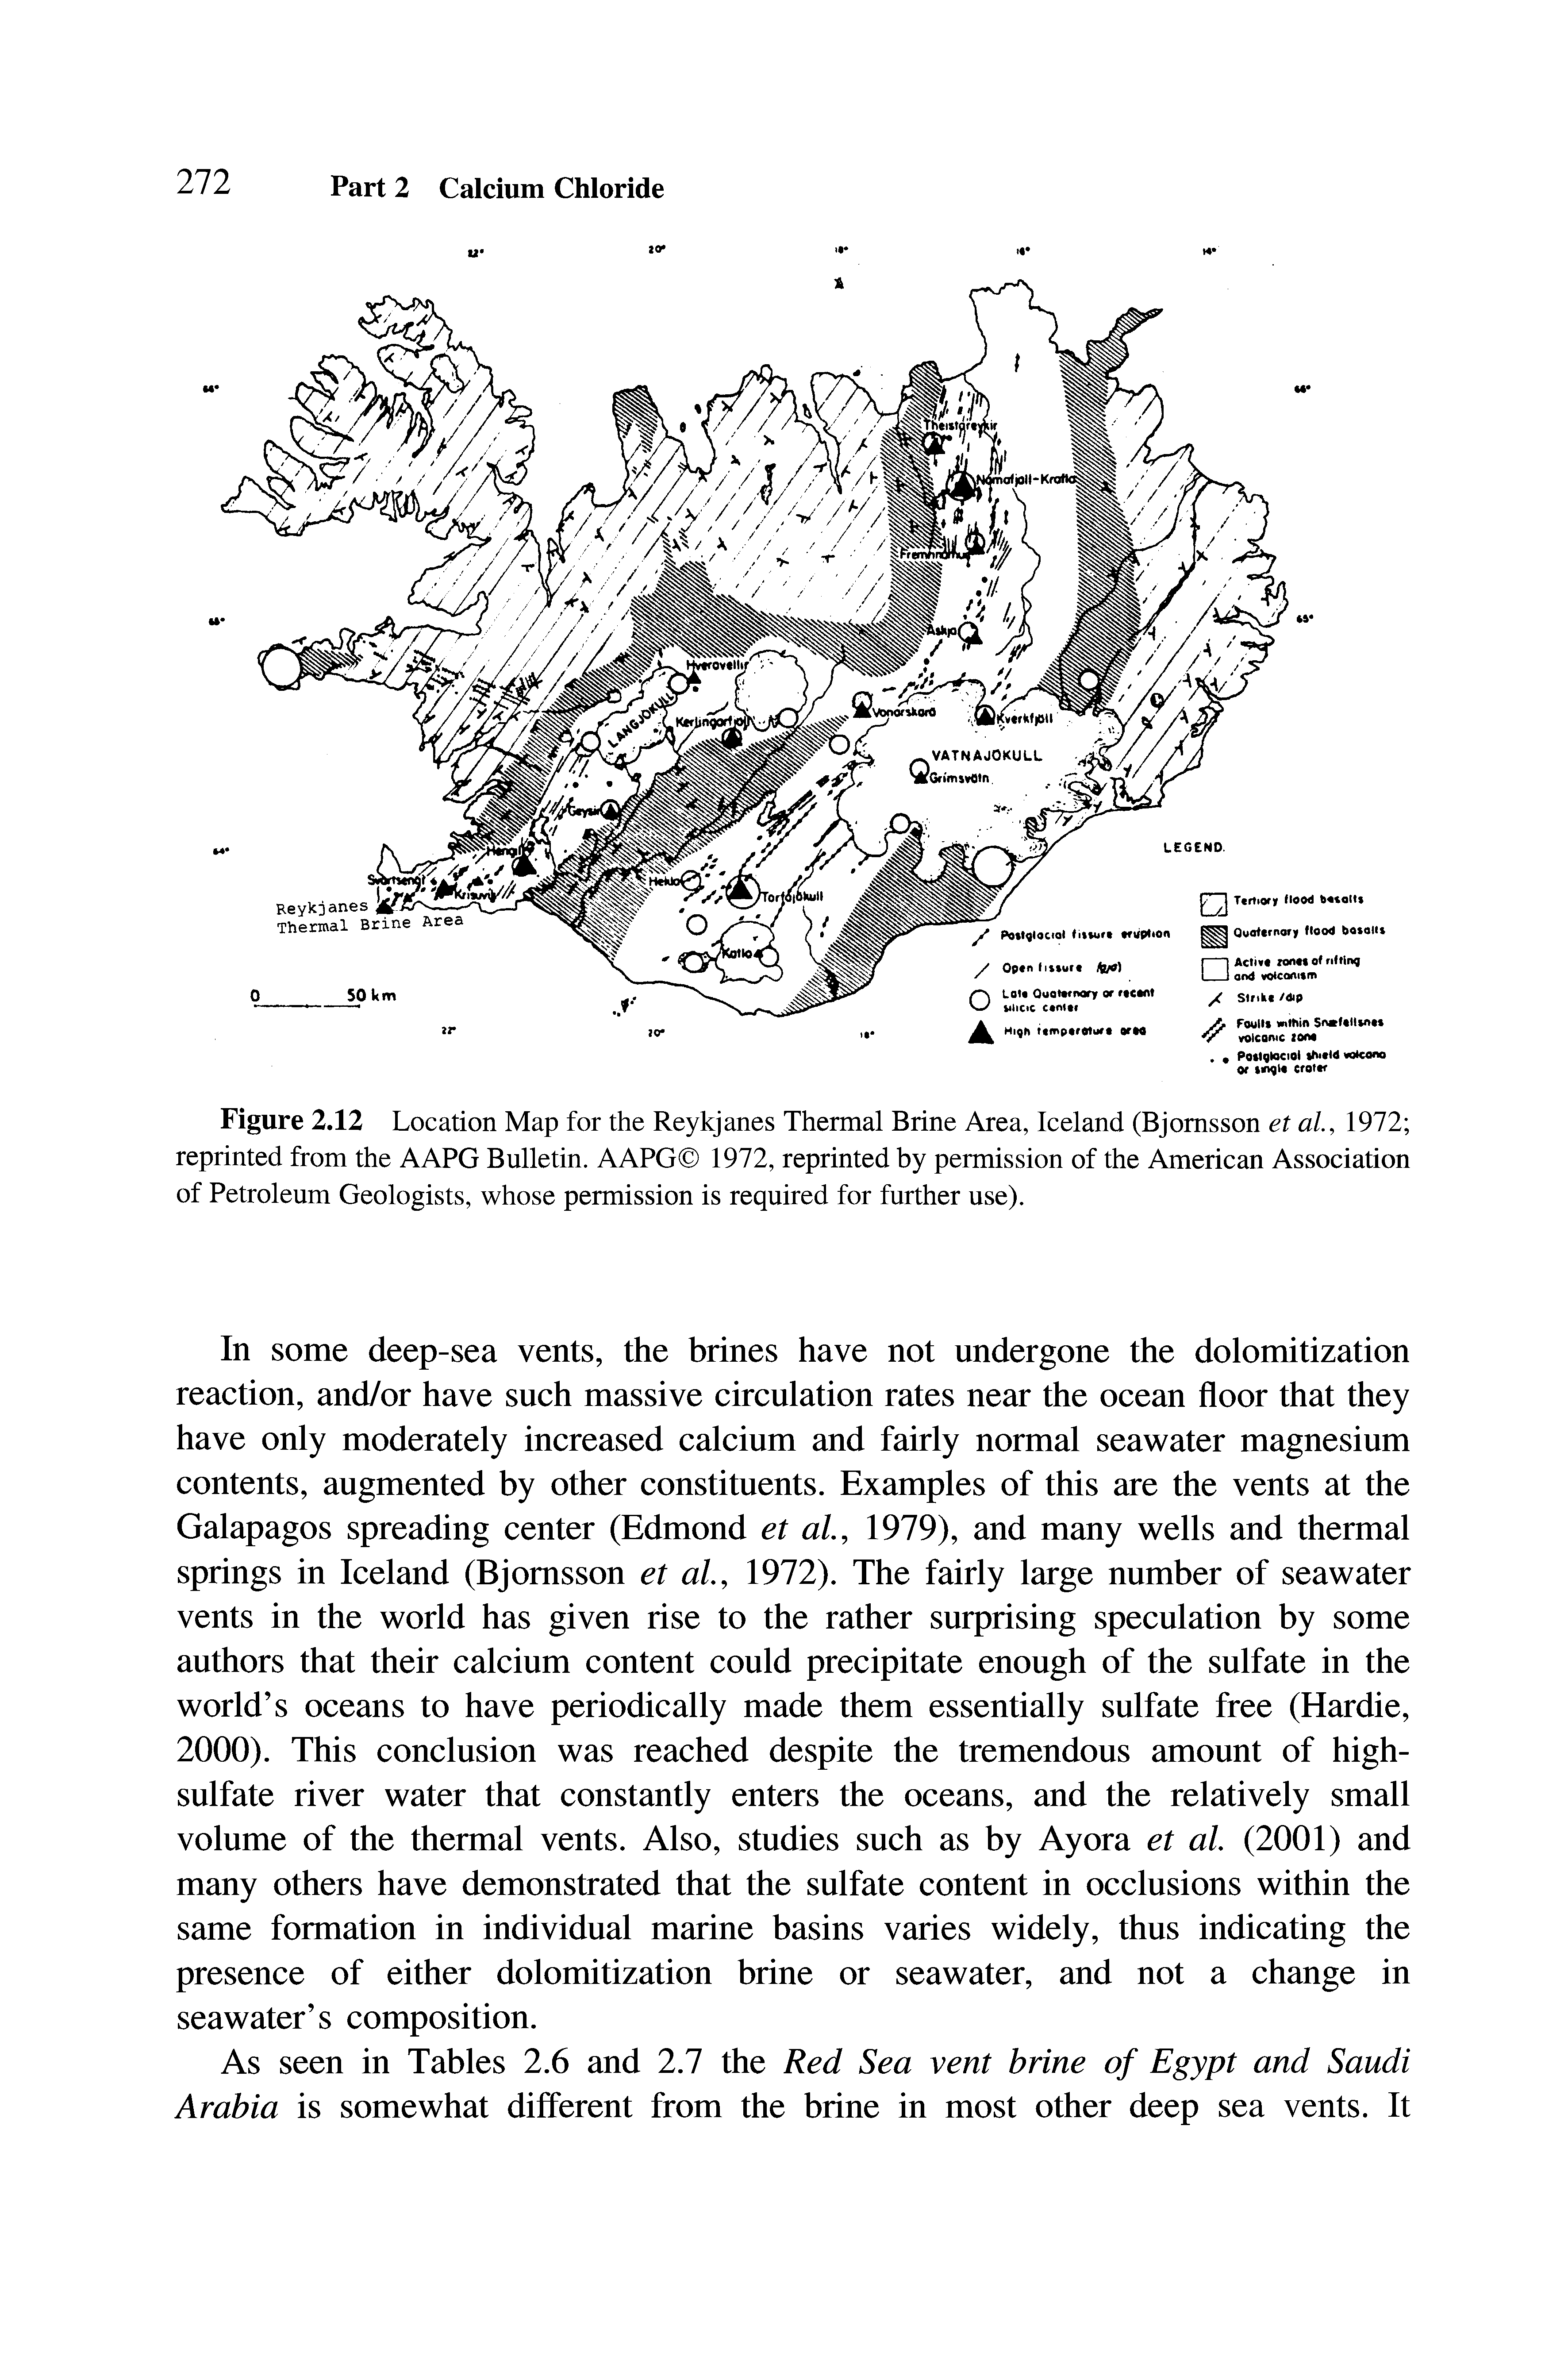 Figure 2.12 Location Map for the Reykjanes Thermal Brine Area, Iceland (Bjomsson et al, 1972 reprinted from the AAPG Bulletin. AAPG 1972, reprinted by permission of the American Association of Petroleum Geologists, whose permission is required for further use).